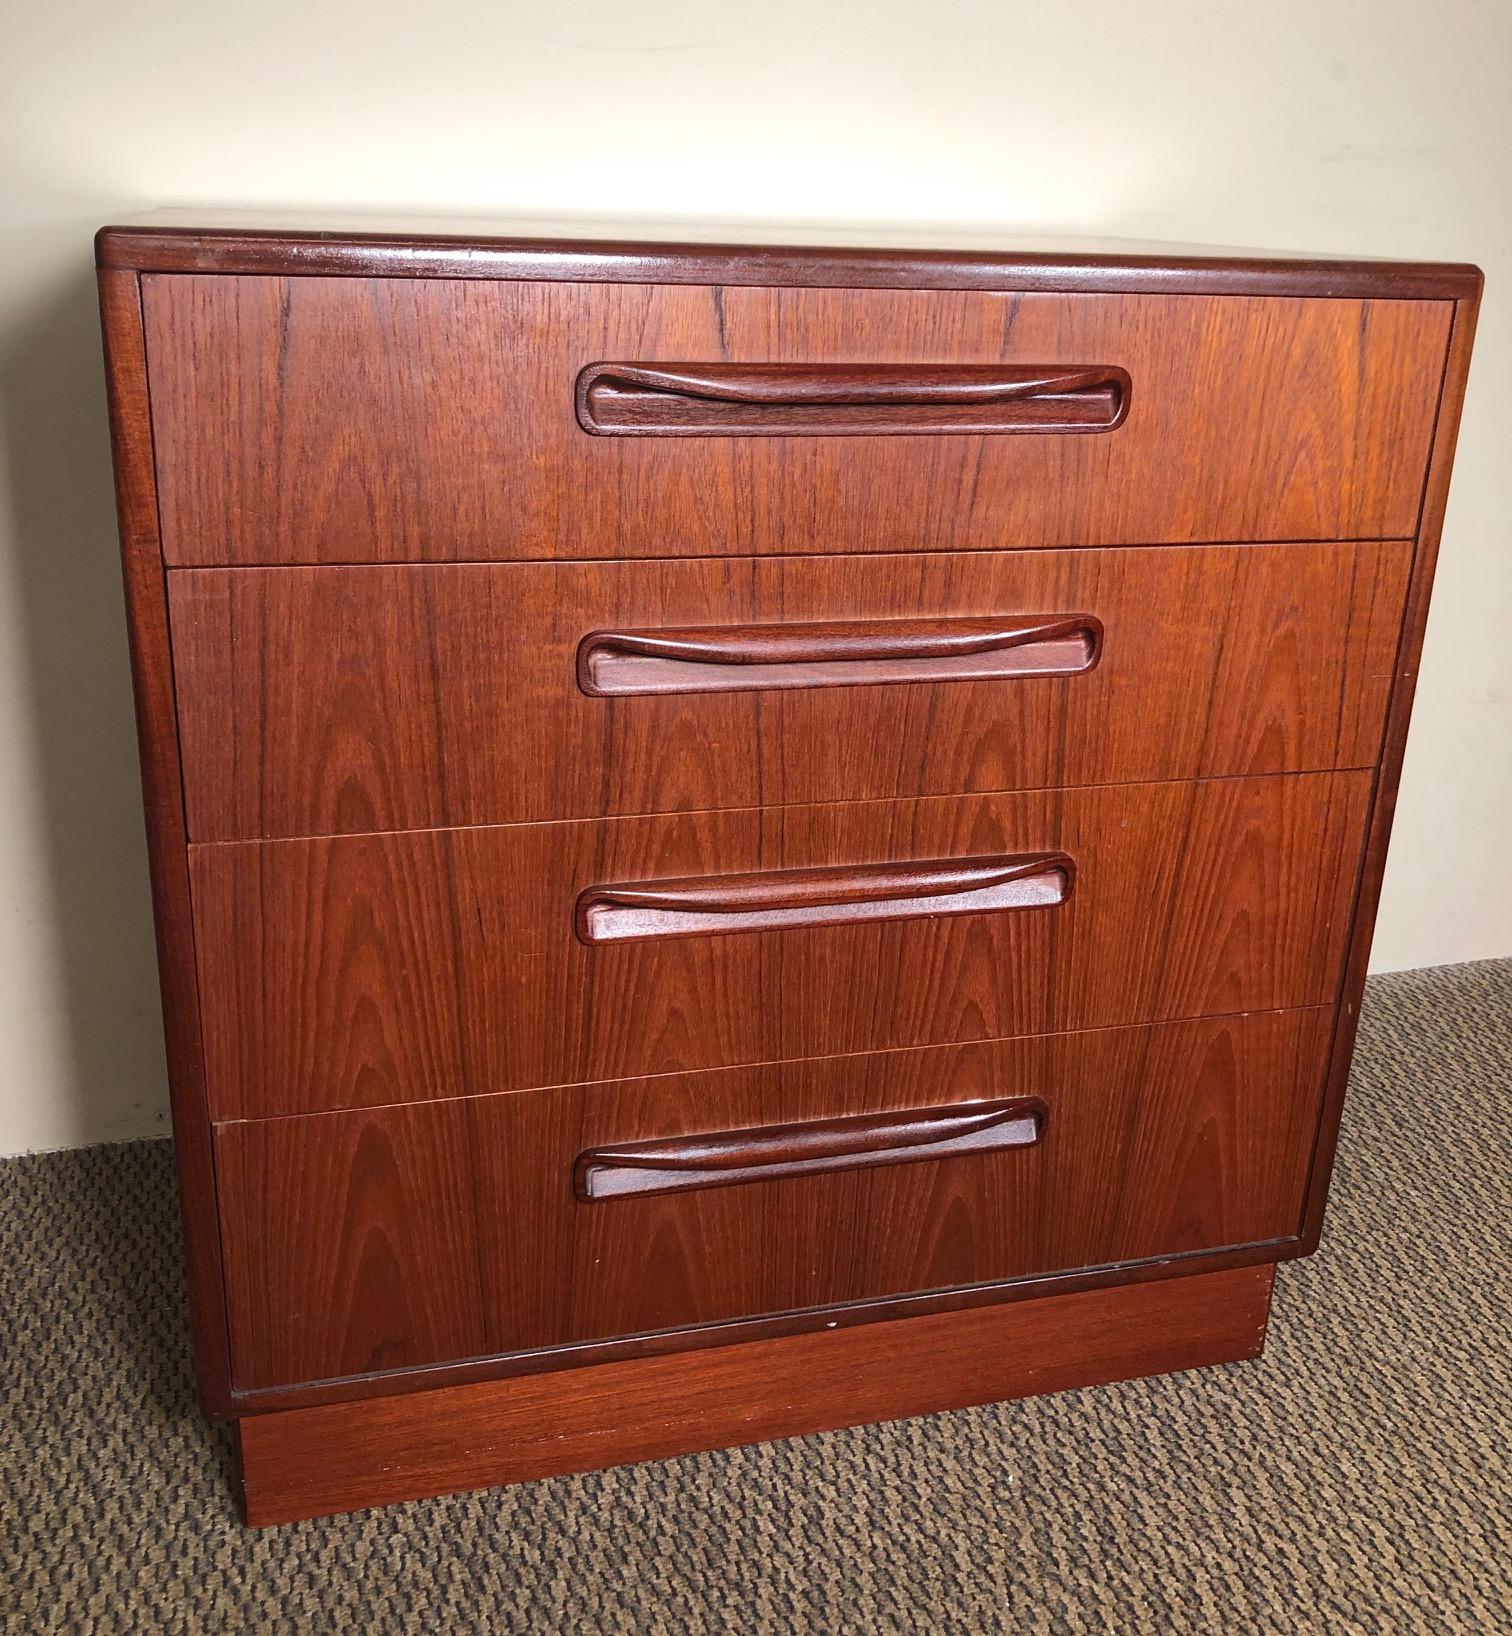 Gorgeous small teak dresser by G Plan. Excellent condition. All the drawers open and close well. Some discoloration and paint stains inside the drawers. Small are of chipping at the bottom rear corner on the right side. Some discoloration on the